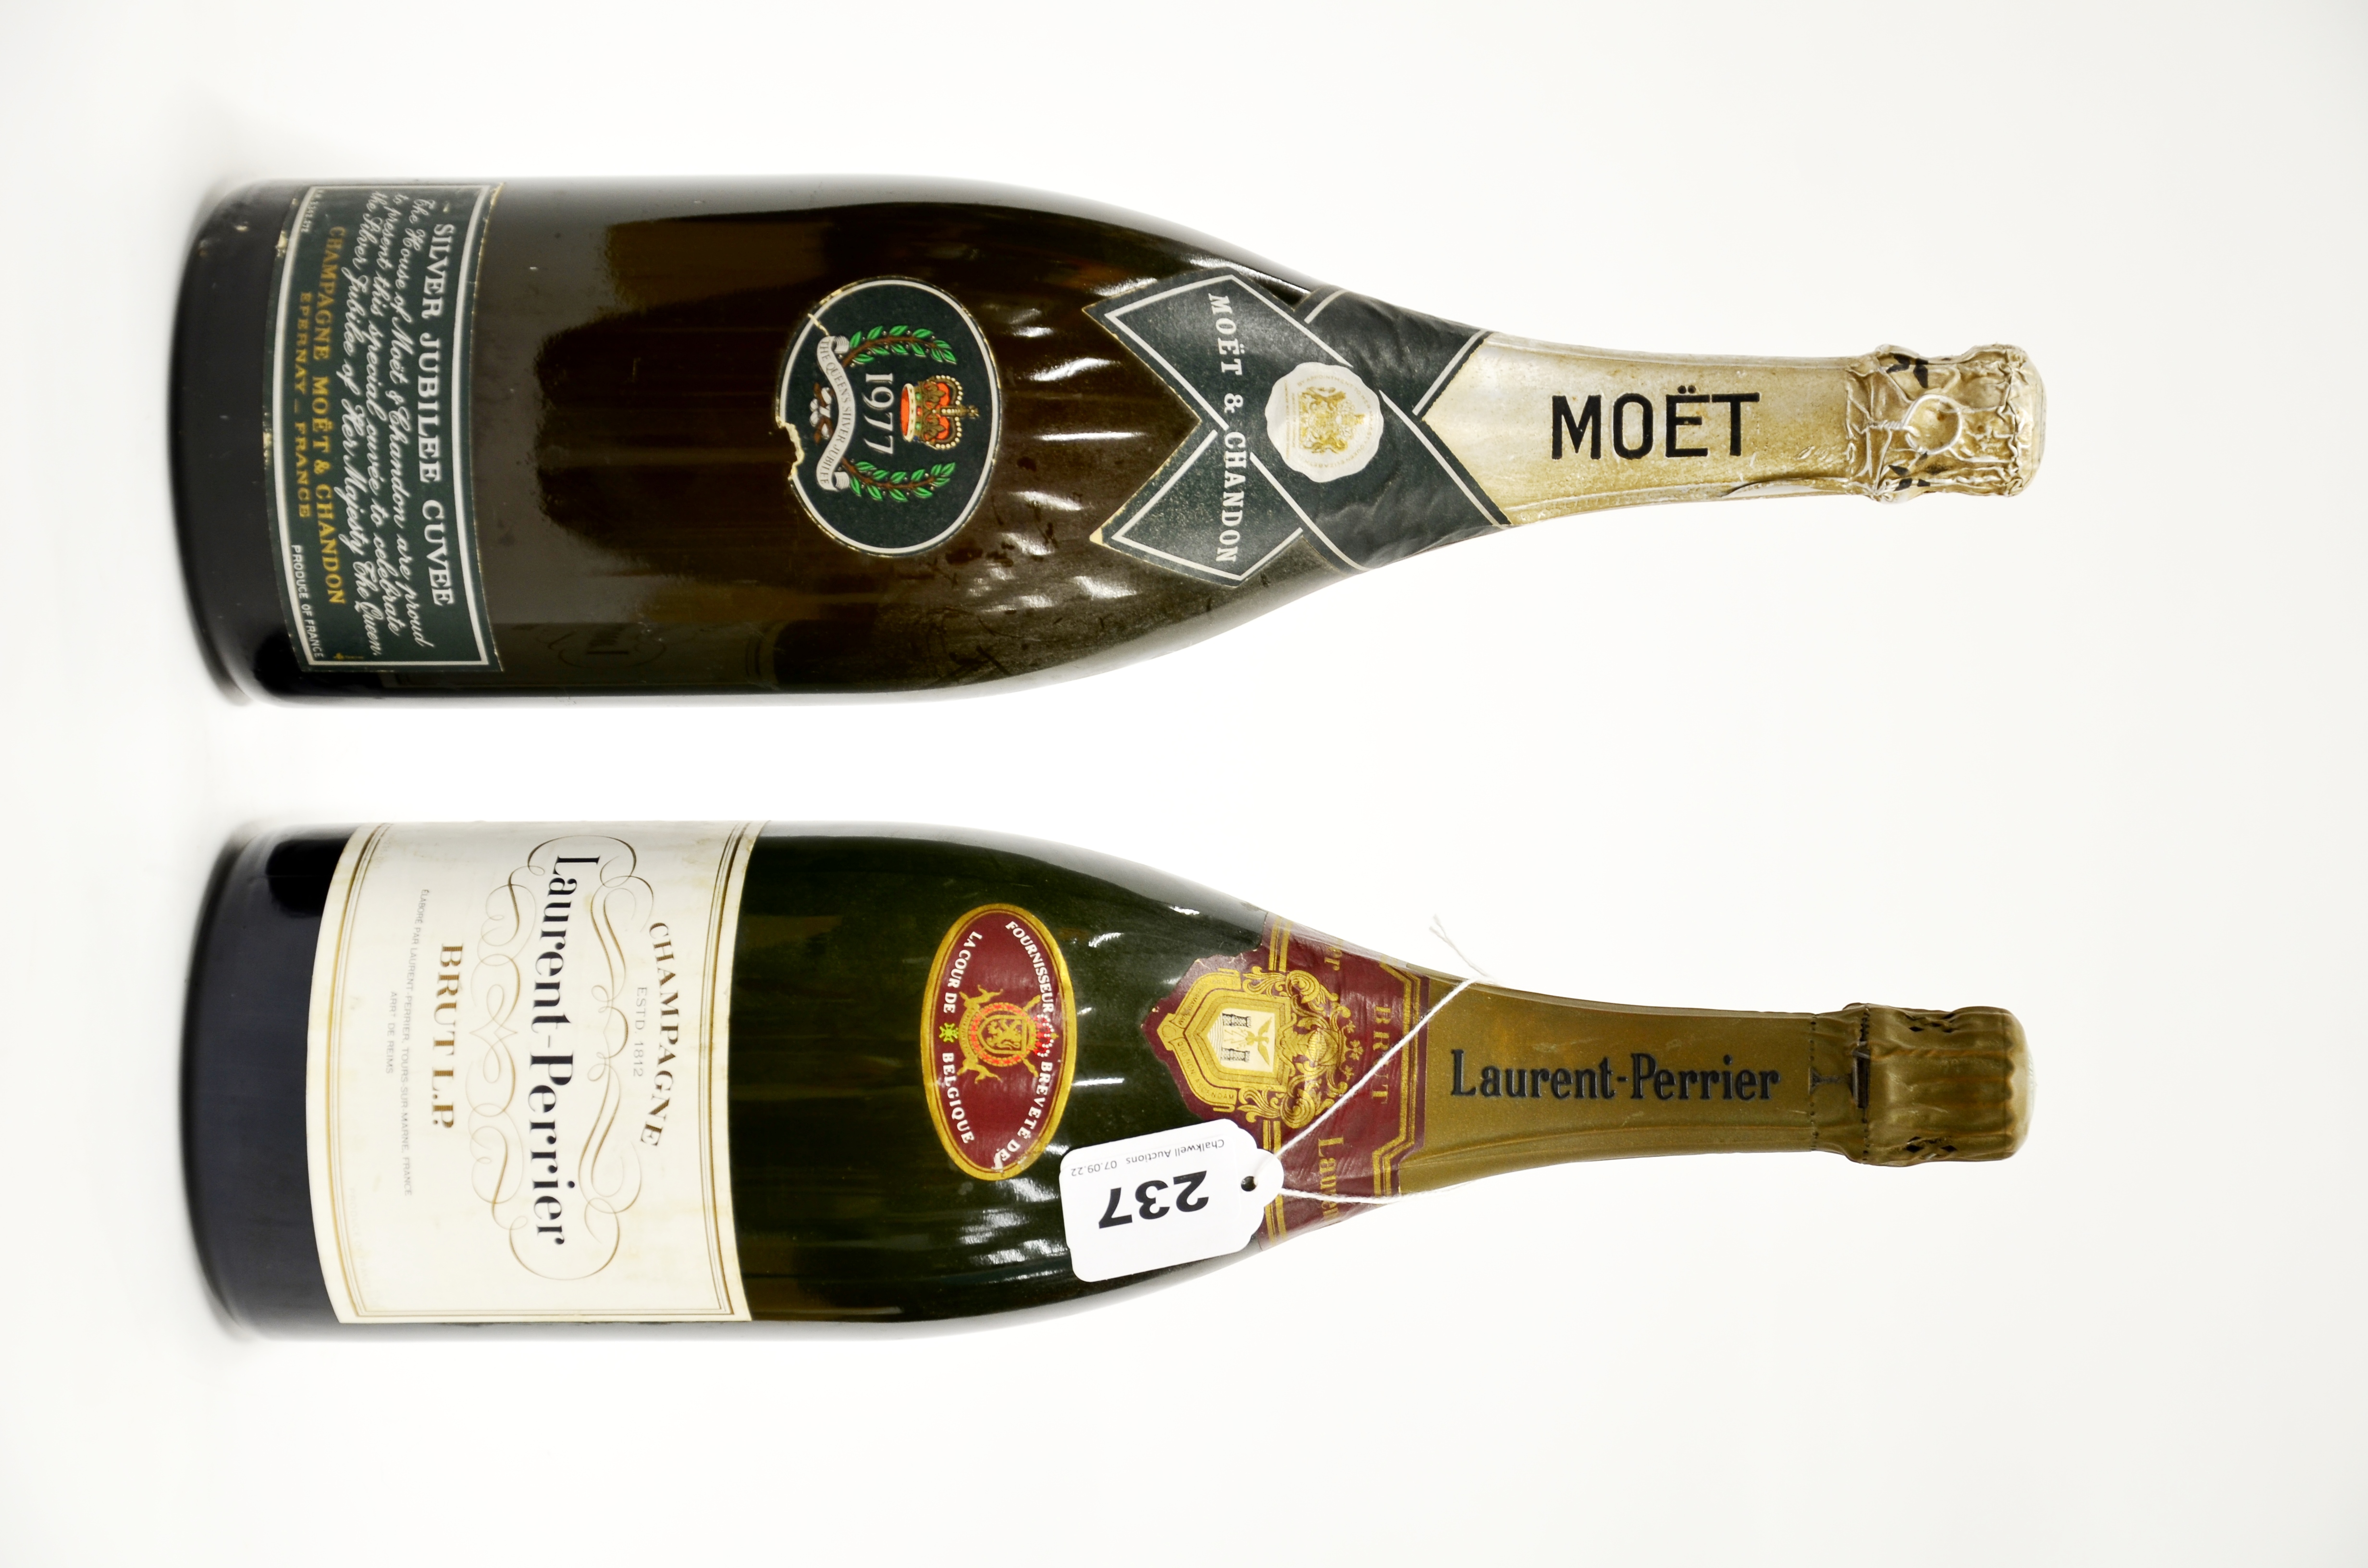 A 1.5L bottle of Laurent-Perrier champagne, together with a 1.5L bottle of silver Jubilee Moet &